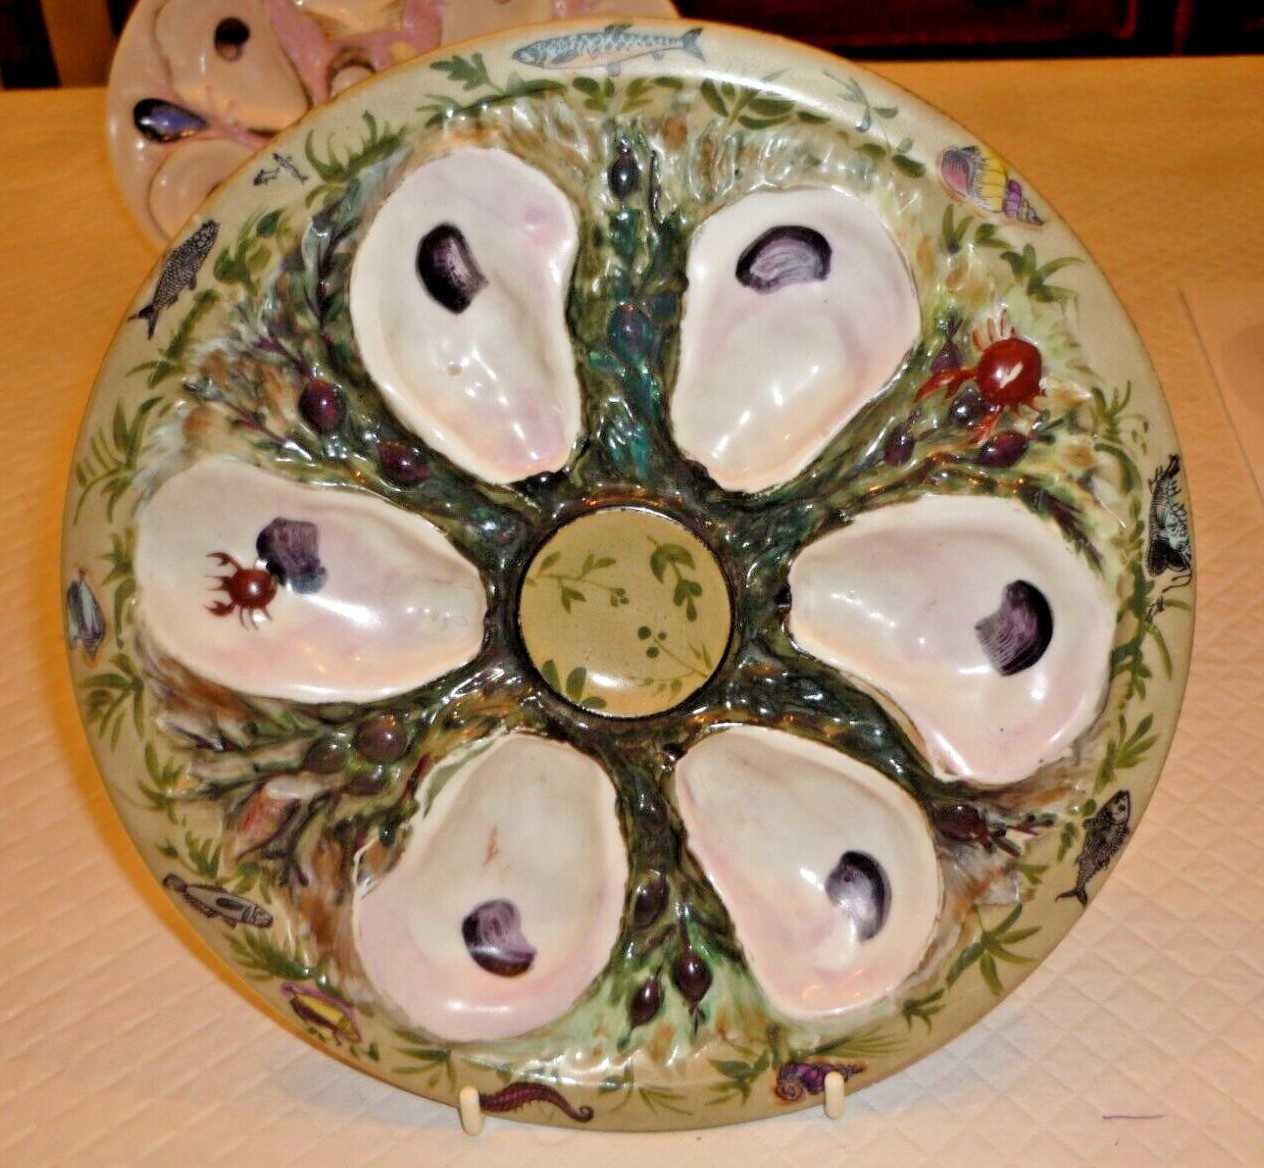 UPW, UNION PORCELAIN WORKS RARE OYSTER PLATE 1879, ROUND, HIGHLY DECORATED